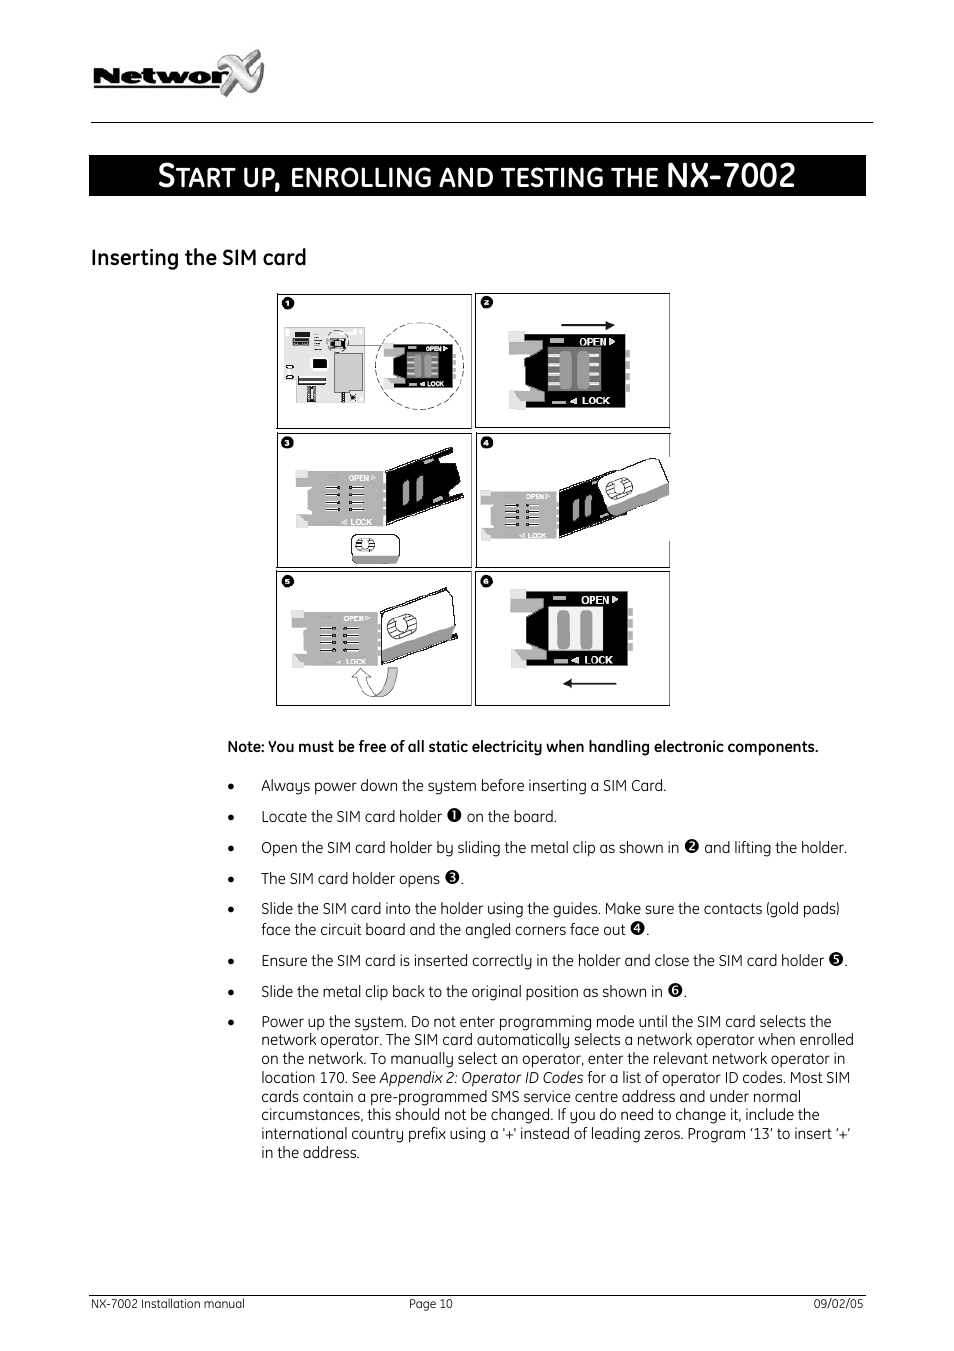 Start up, enrolling and testing the nx-7002, Inserting the sim card, Nserting the | Card, Nx-7002, Tart up, Enrolling and testing the | GE NetworX NX-7002 User Manual | Page 10 / 39